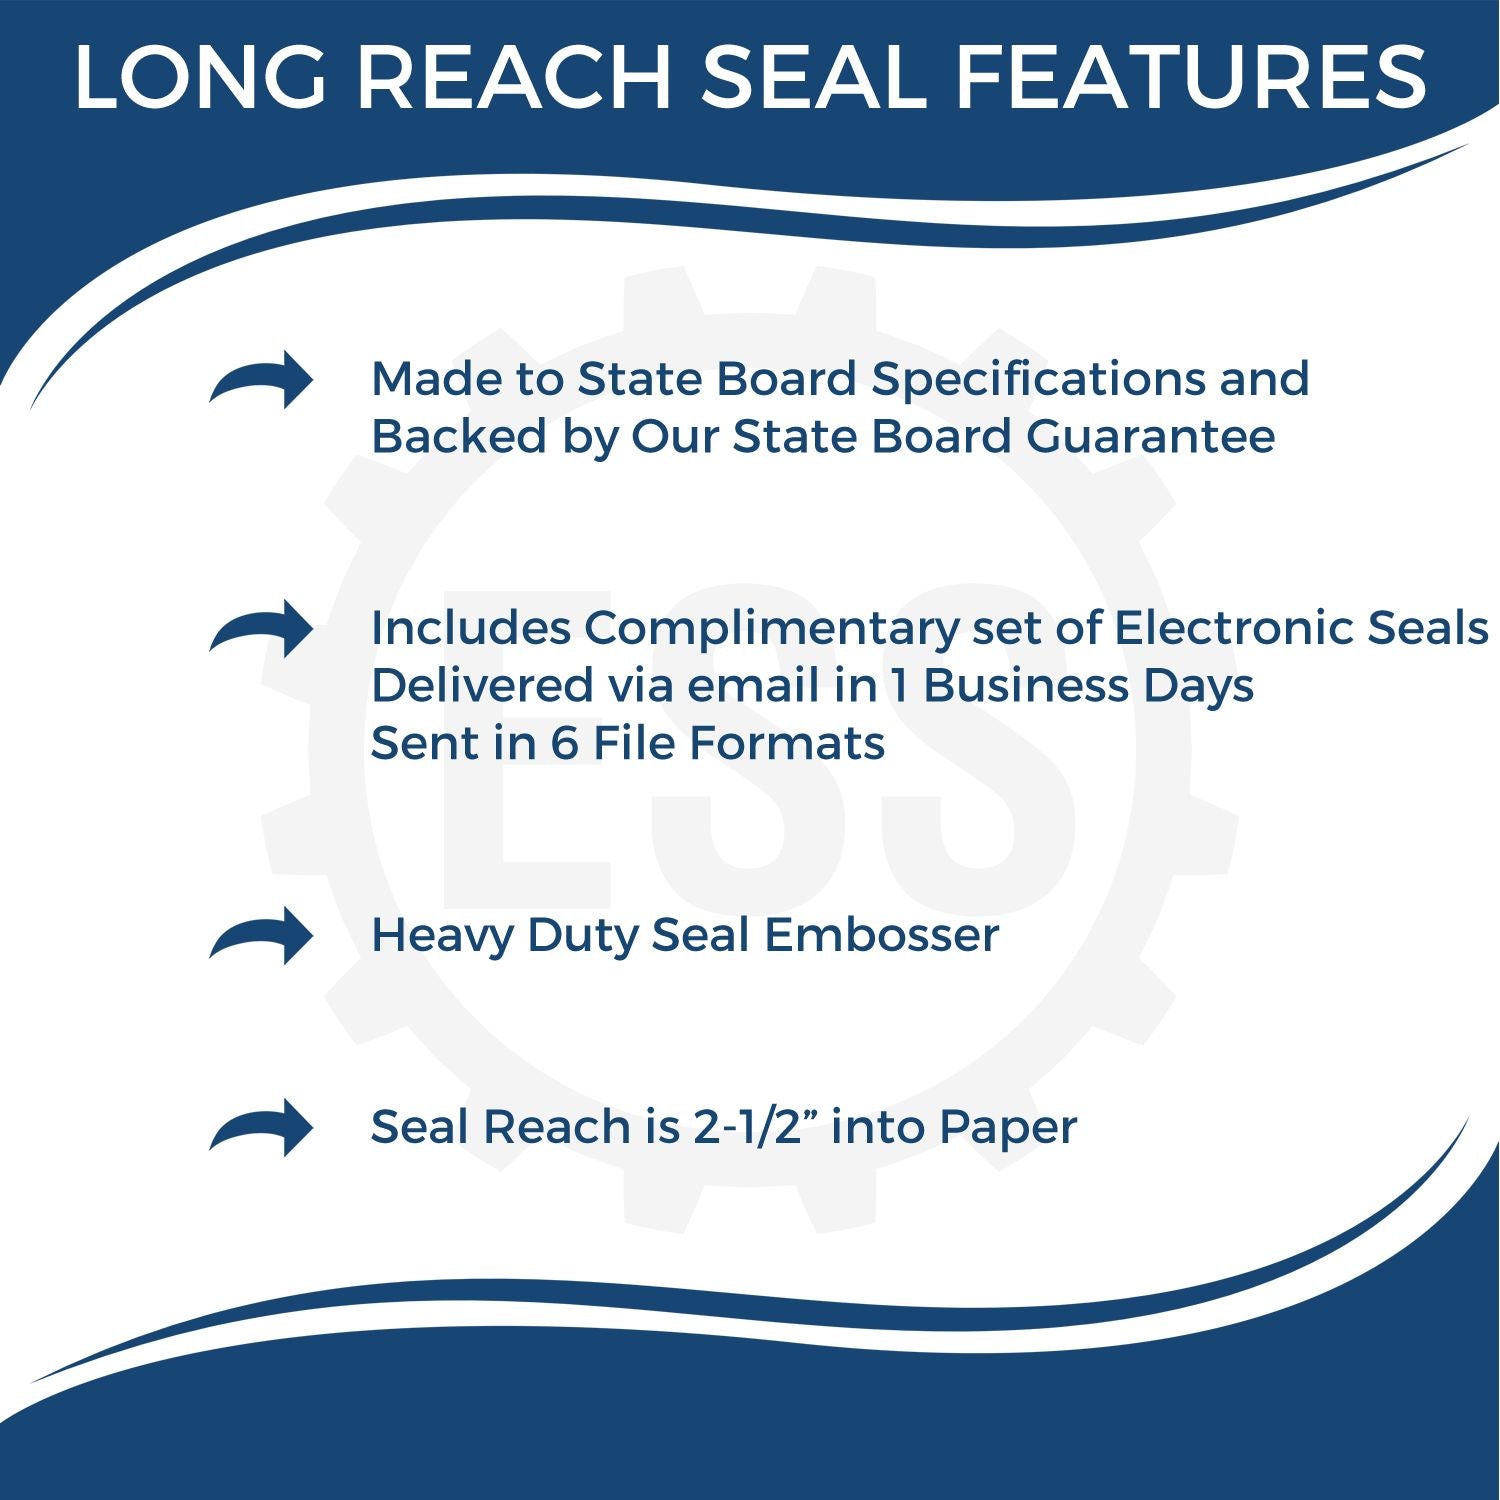 A picture of an infographic highlighting the selling points for the Long Reach Virginia Land Surveyor Seal